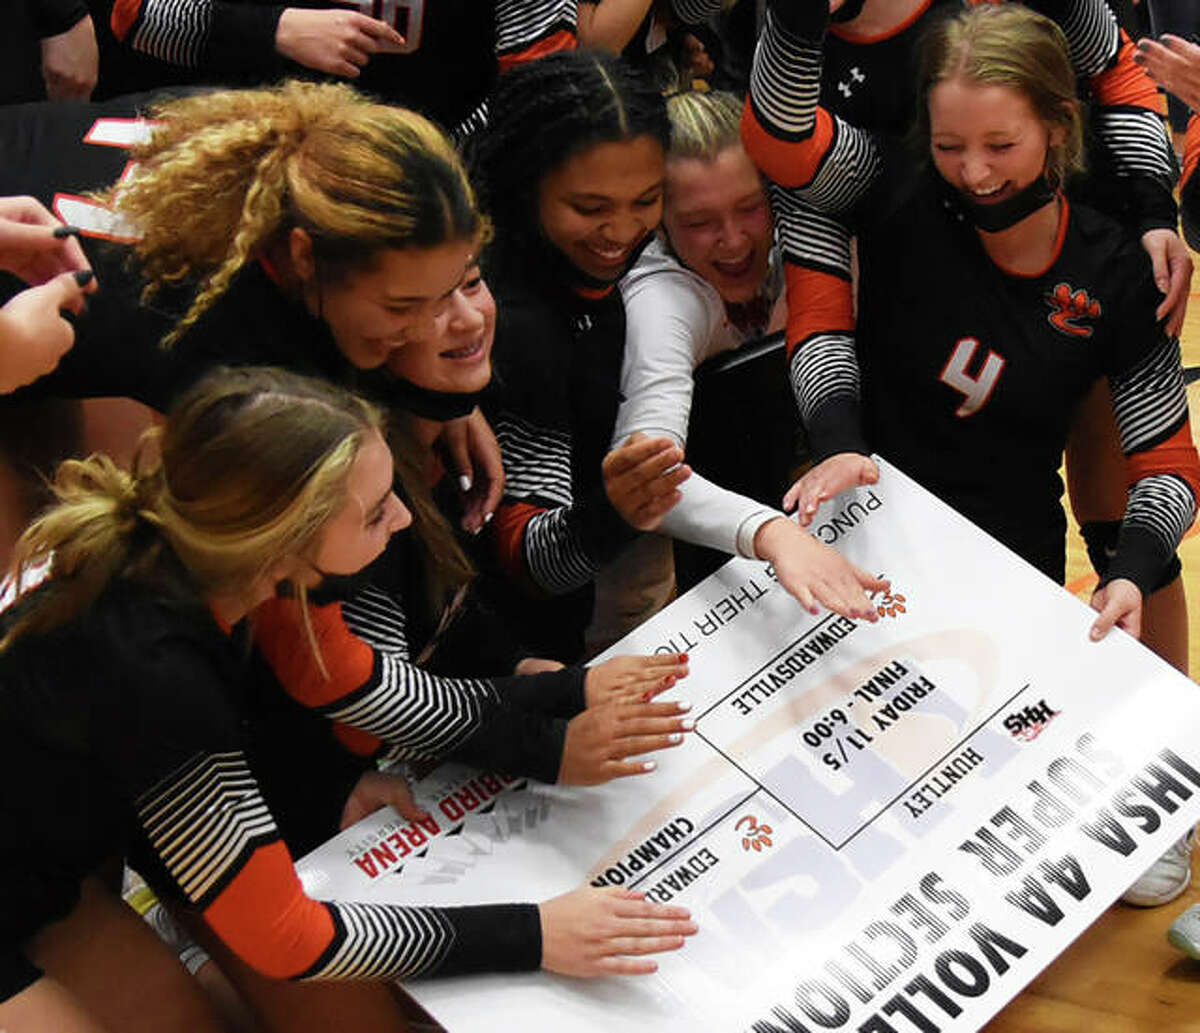 The Edwardsville girls volleyball team celebrates after winning the Class 4A DeKalb Super-Sectional on Friday to punch its ticket to the state tournament.